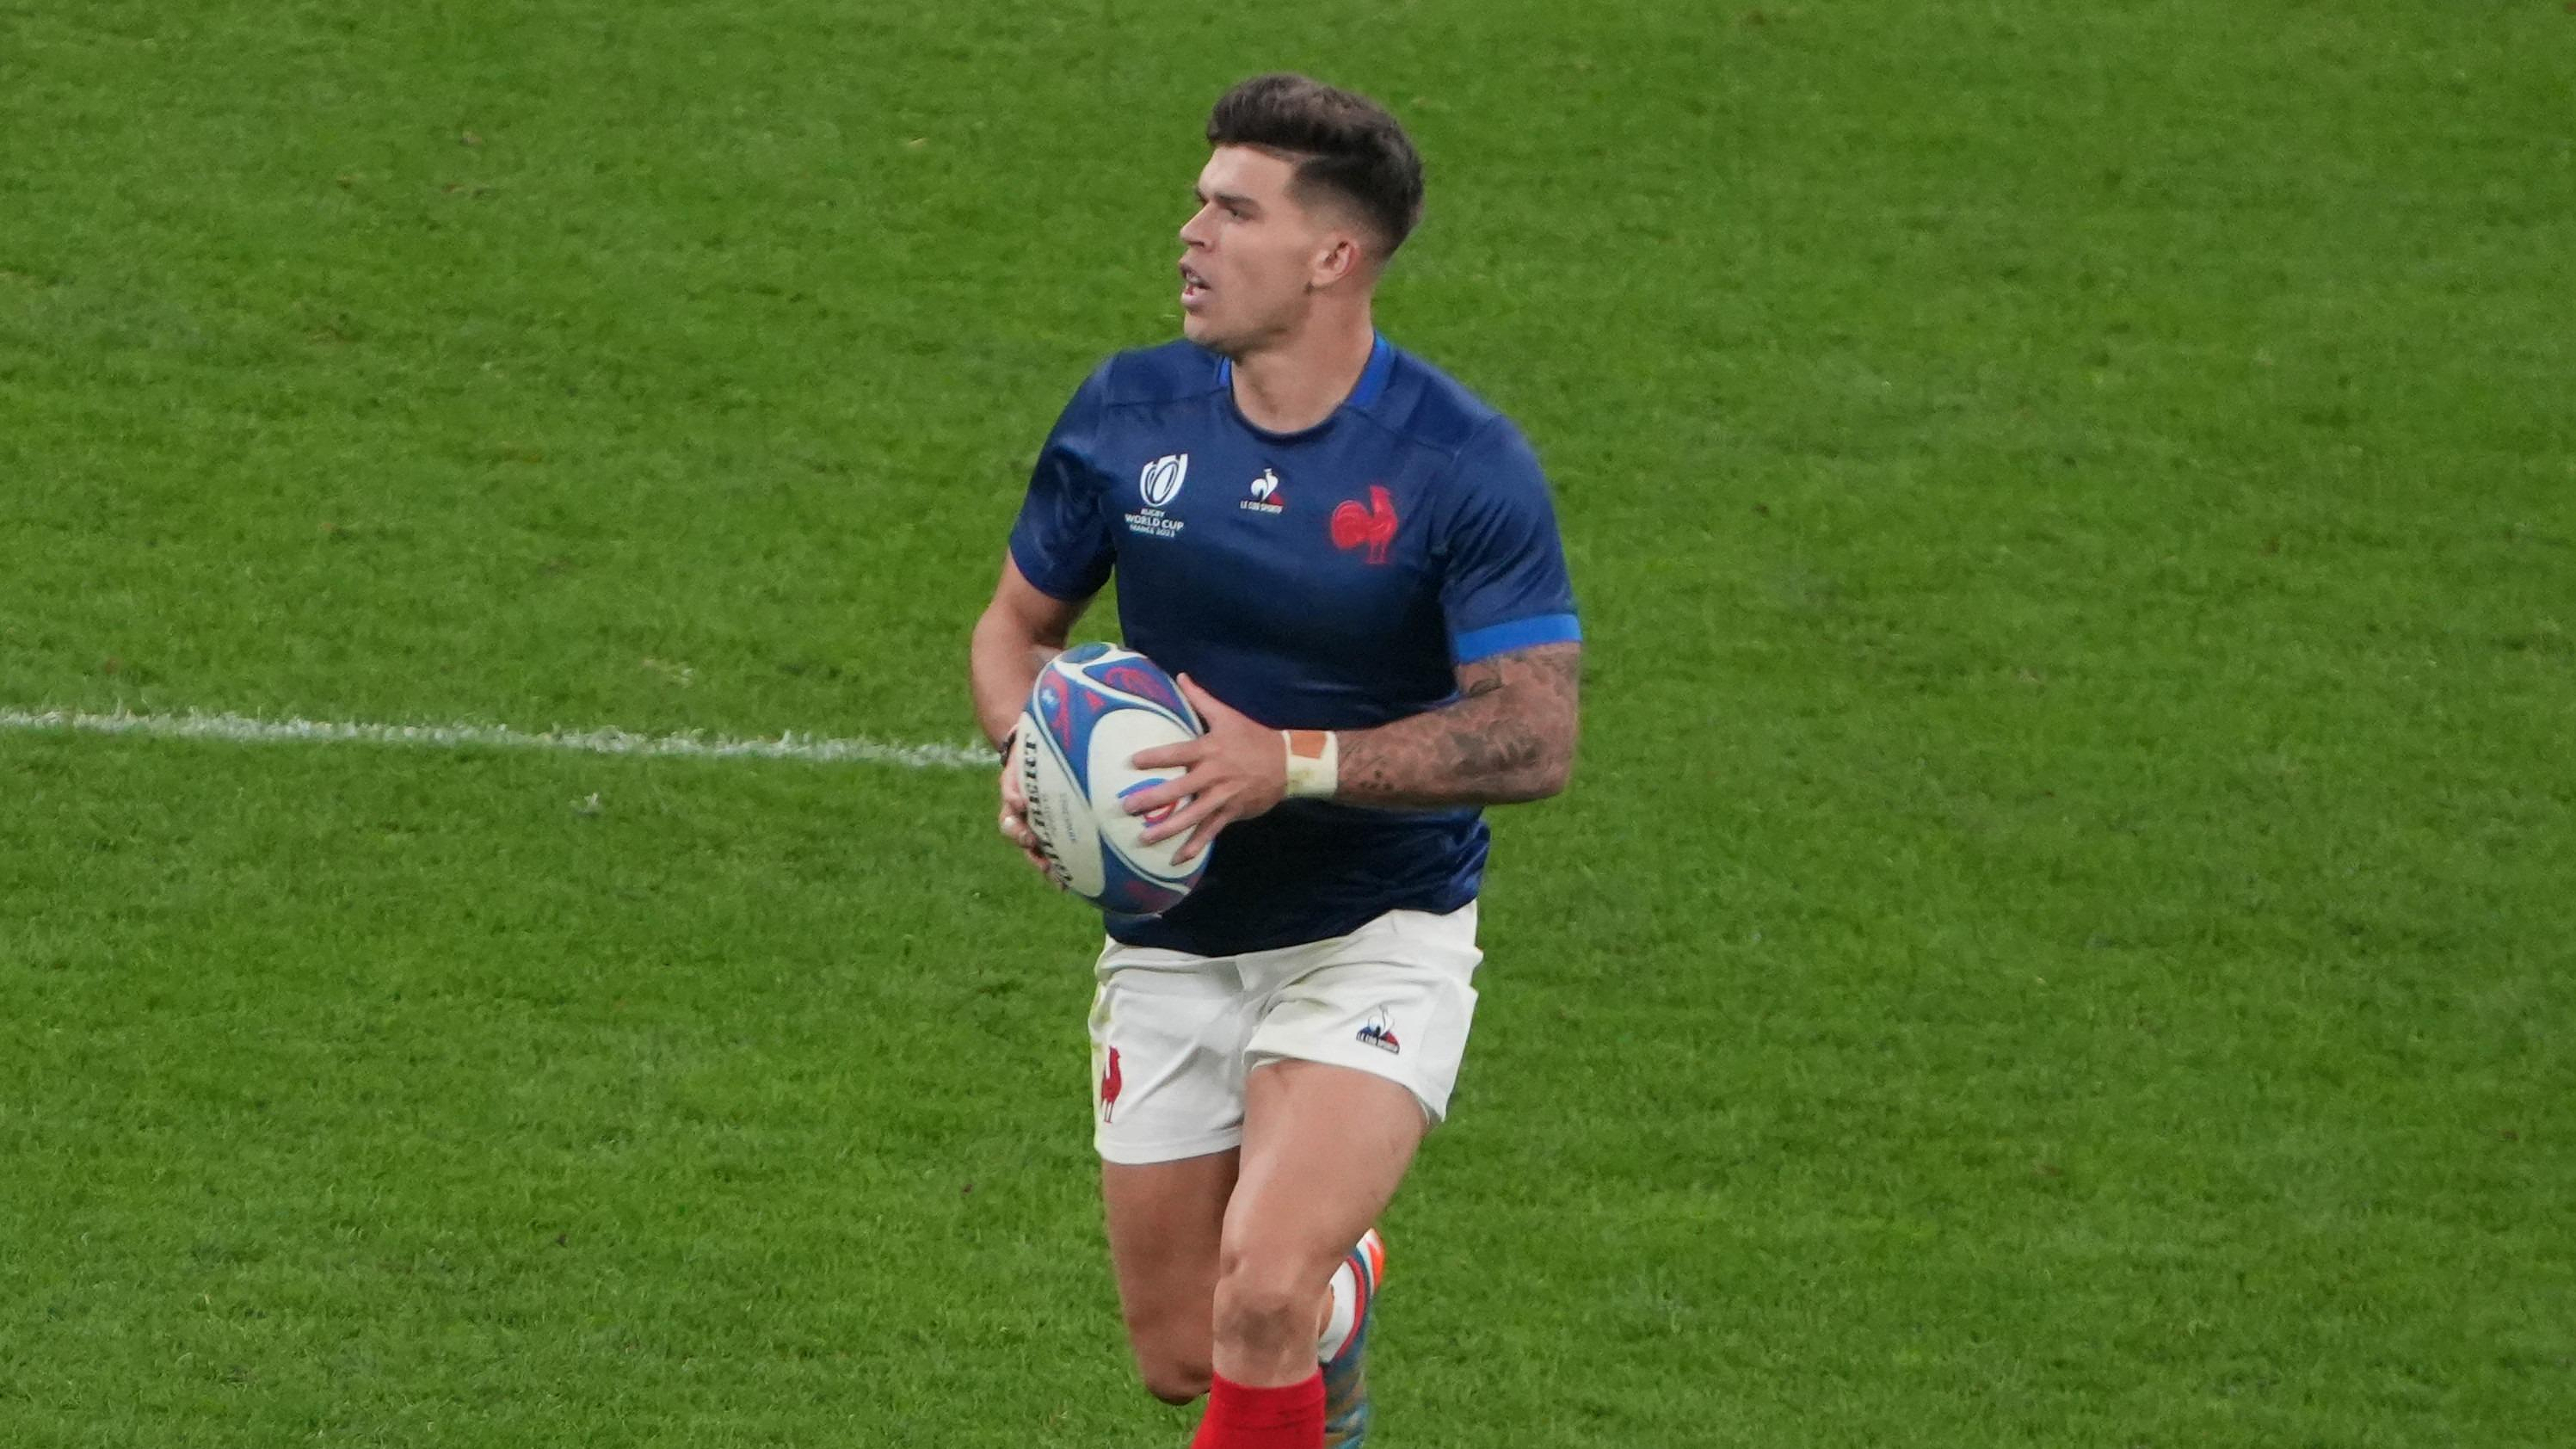 XV of France: Jalibert spared in training, Gabrillagues with the holders